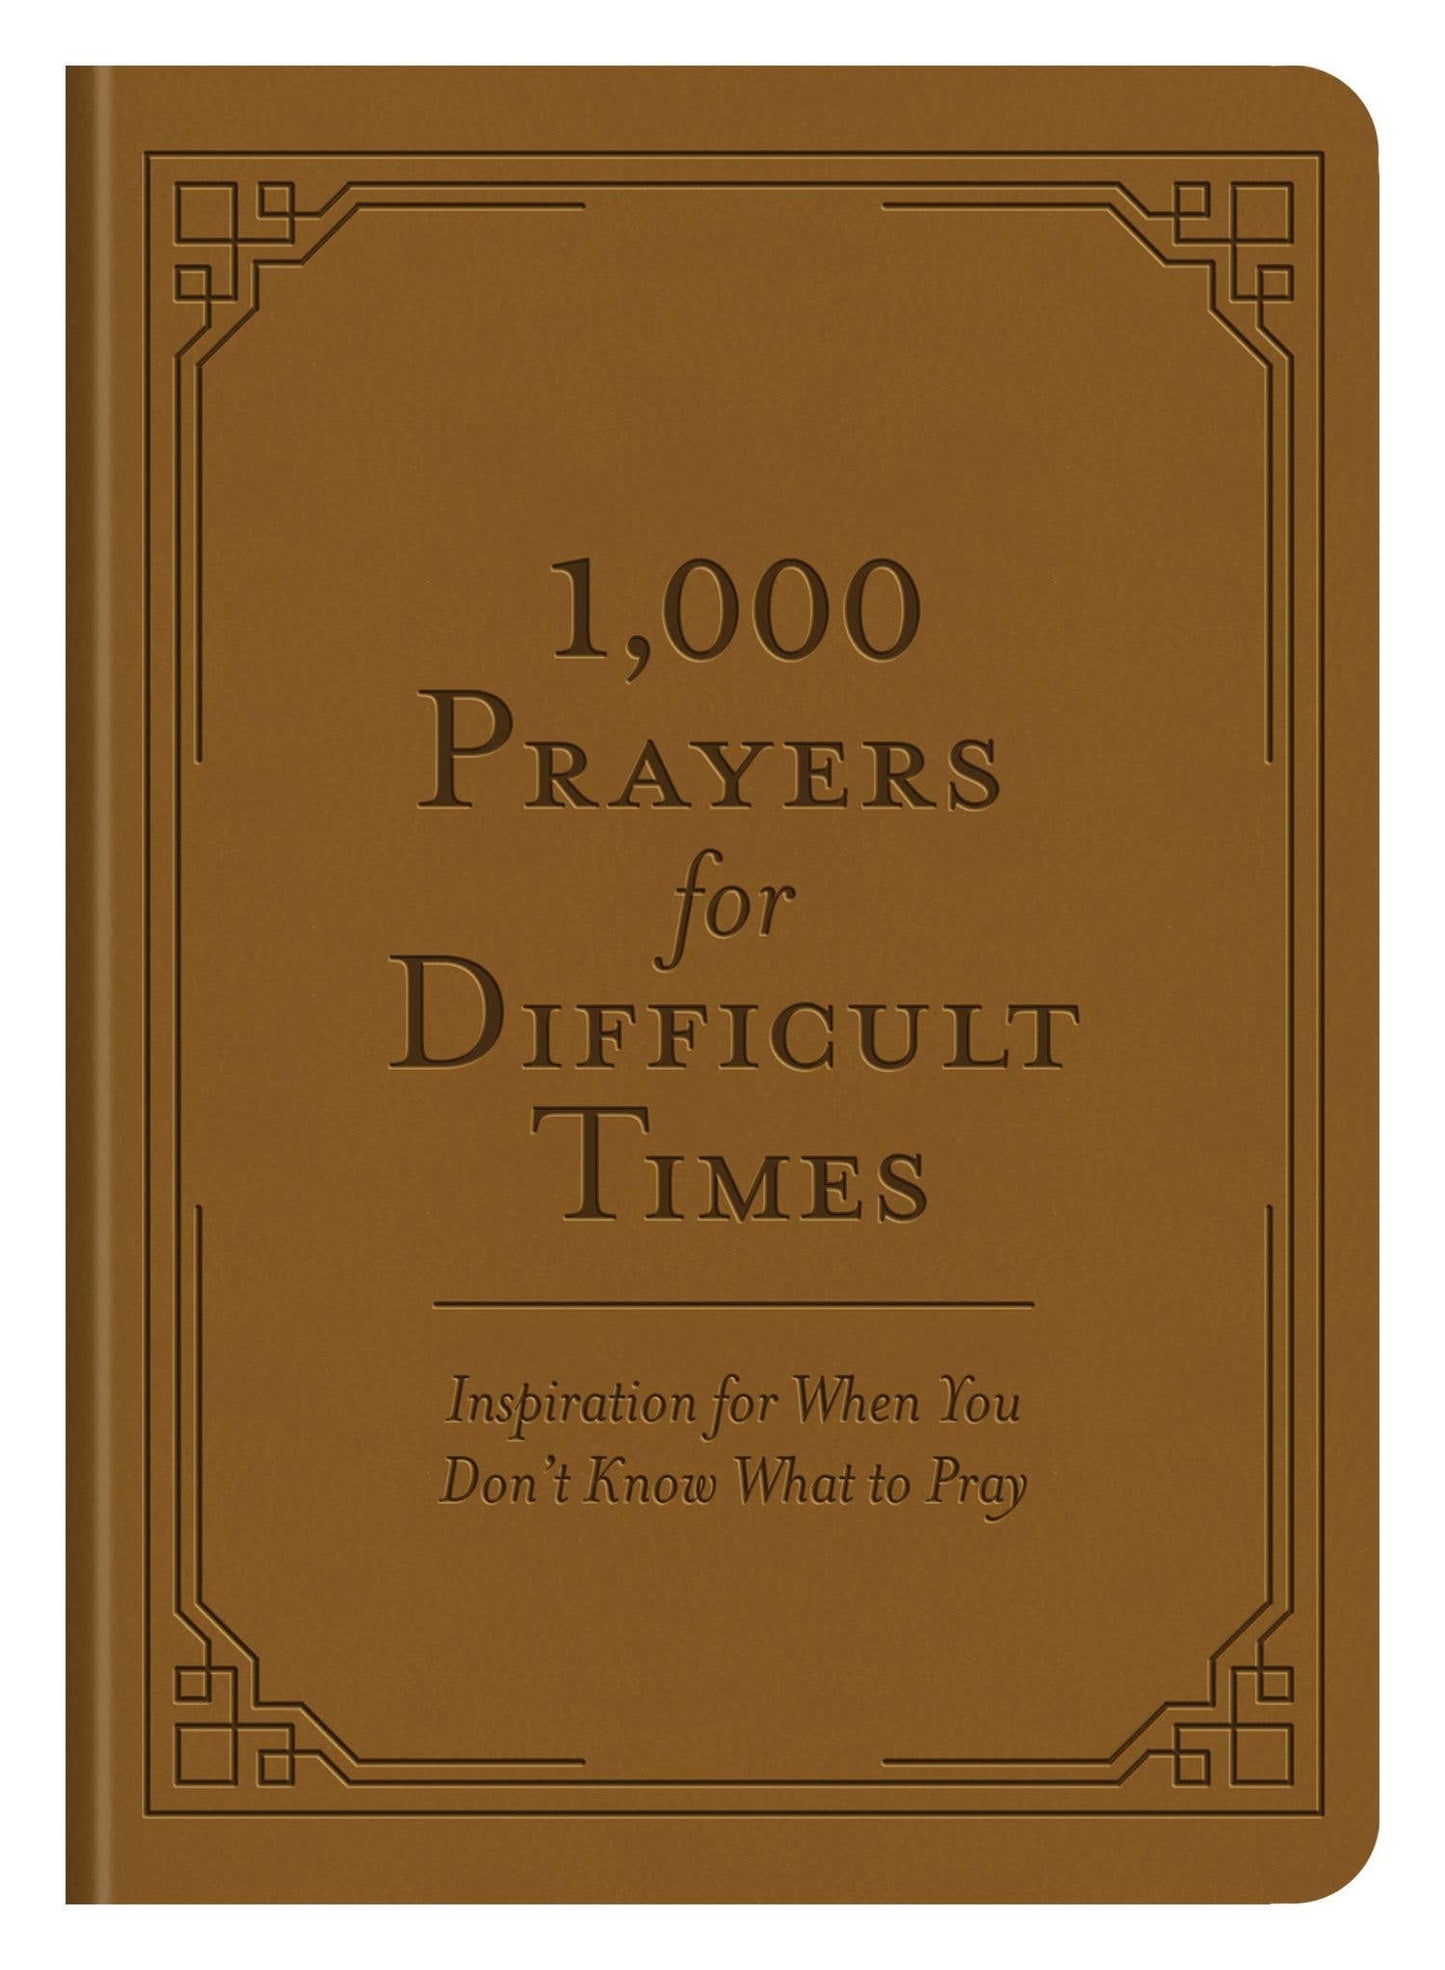 Barbour Publishing, Inc. - 1,000 Prayers for Difficult Times